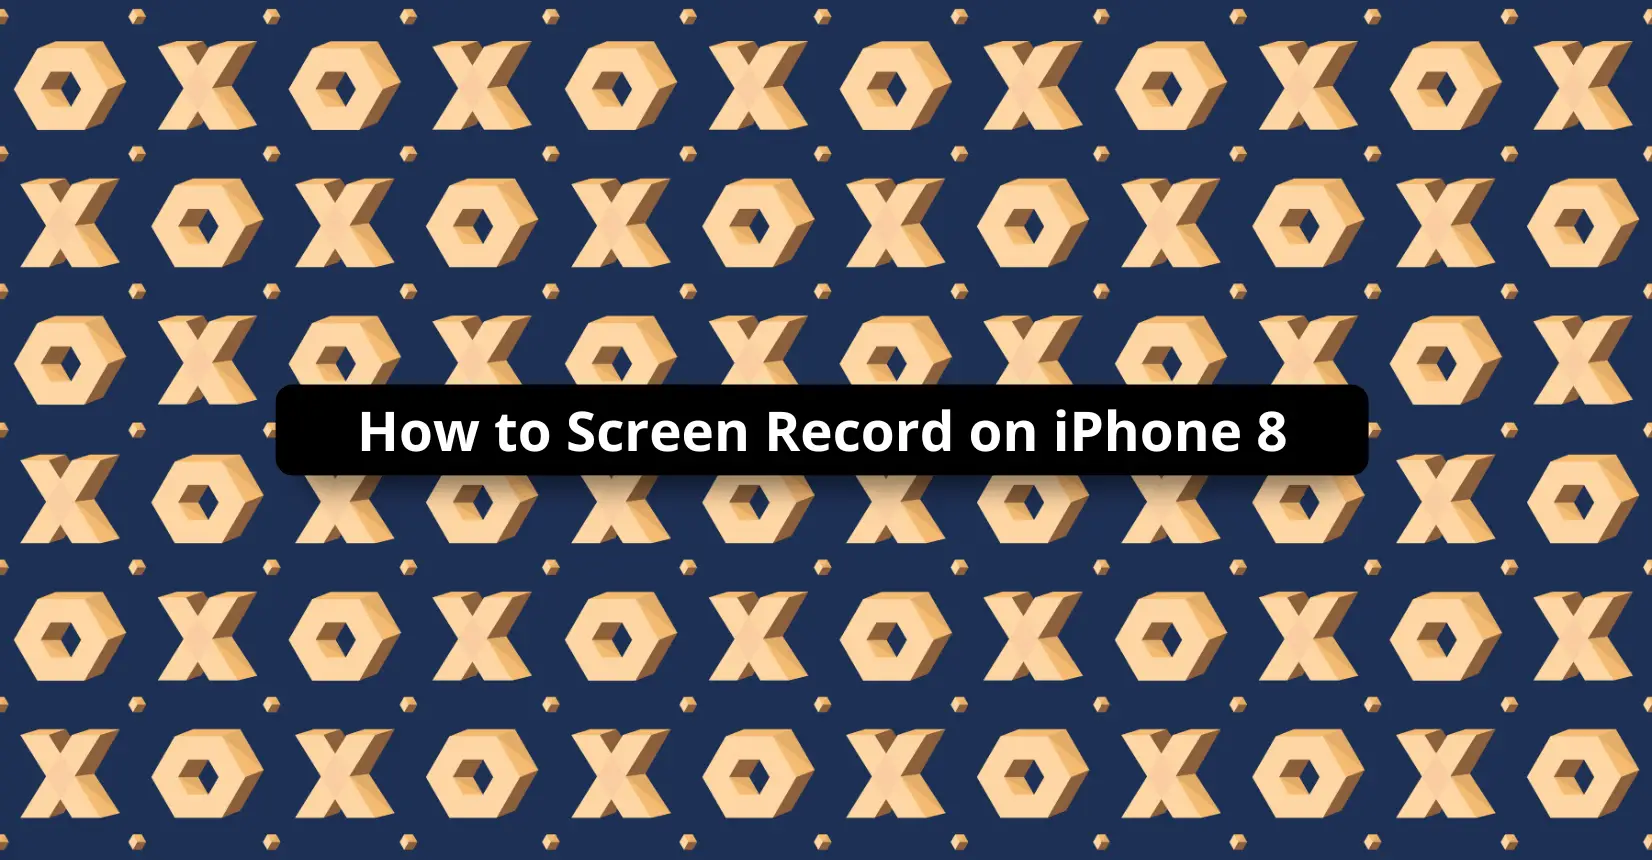 How to Screen Record on iPhone 8